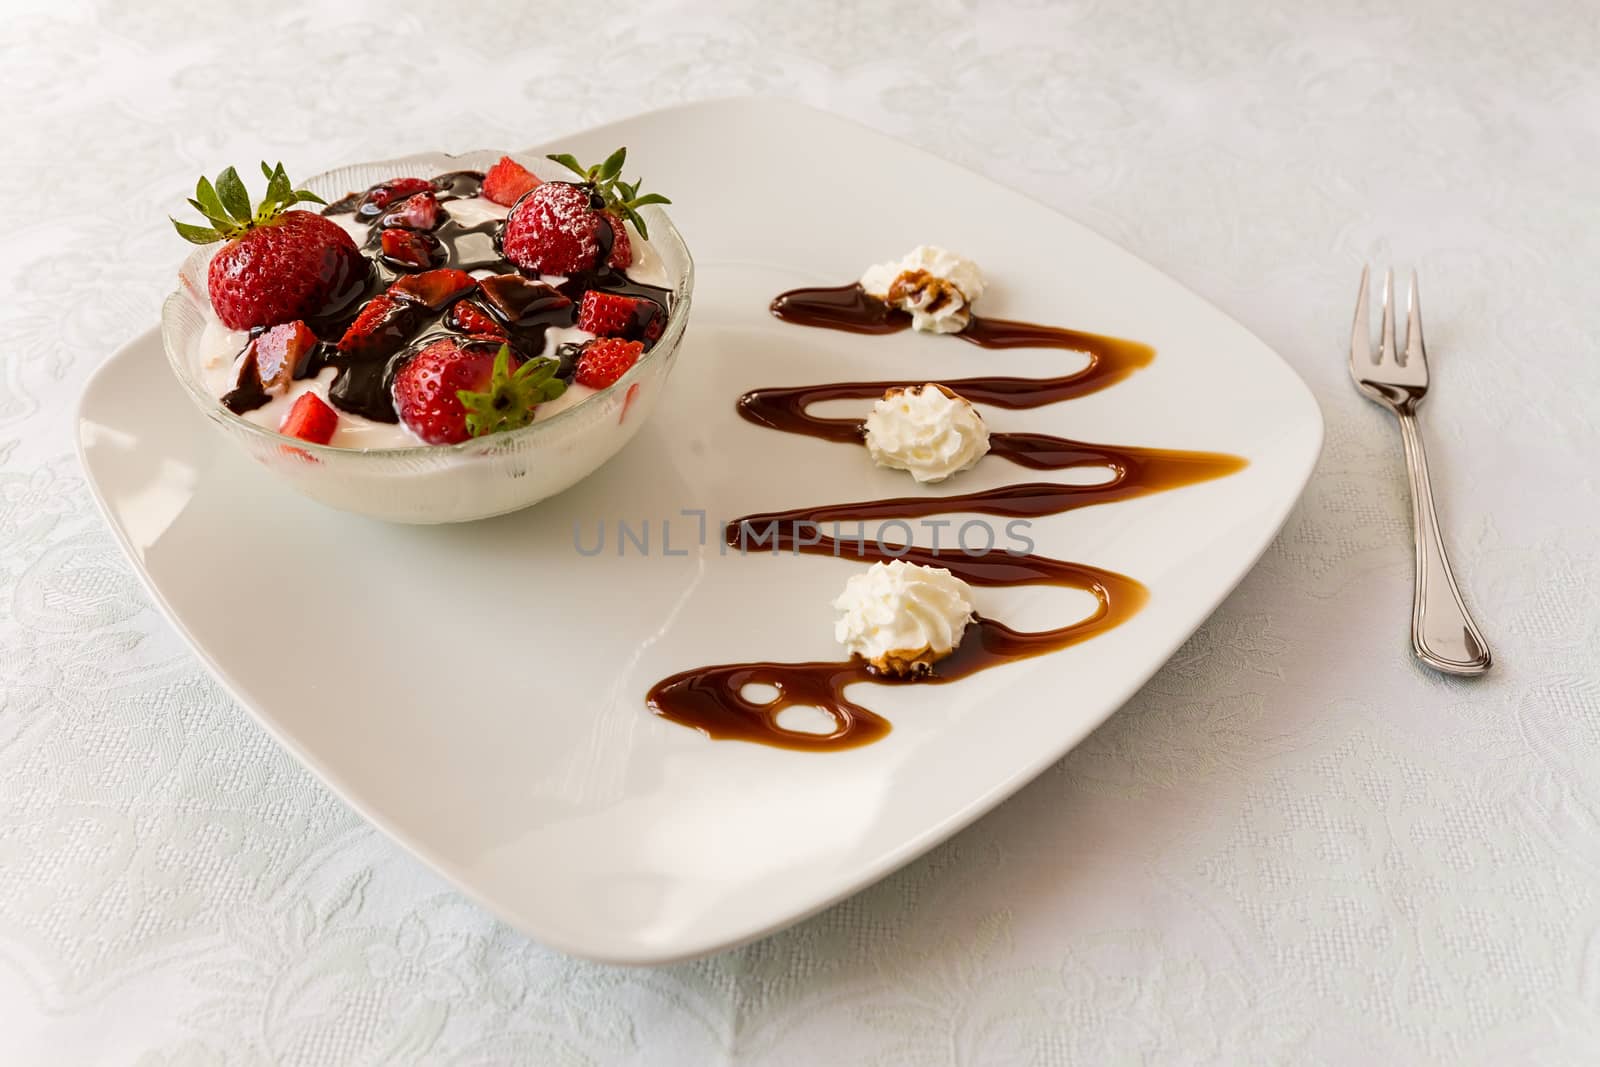 Dessert with strawberries and yogurt in a bowl over a square plate with decorations and cream